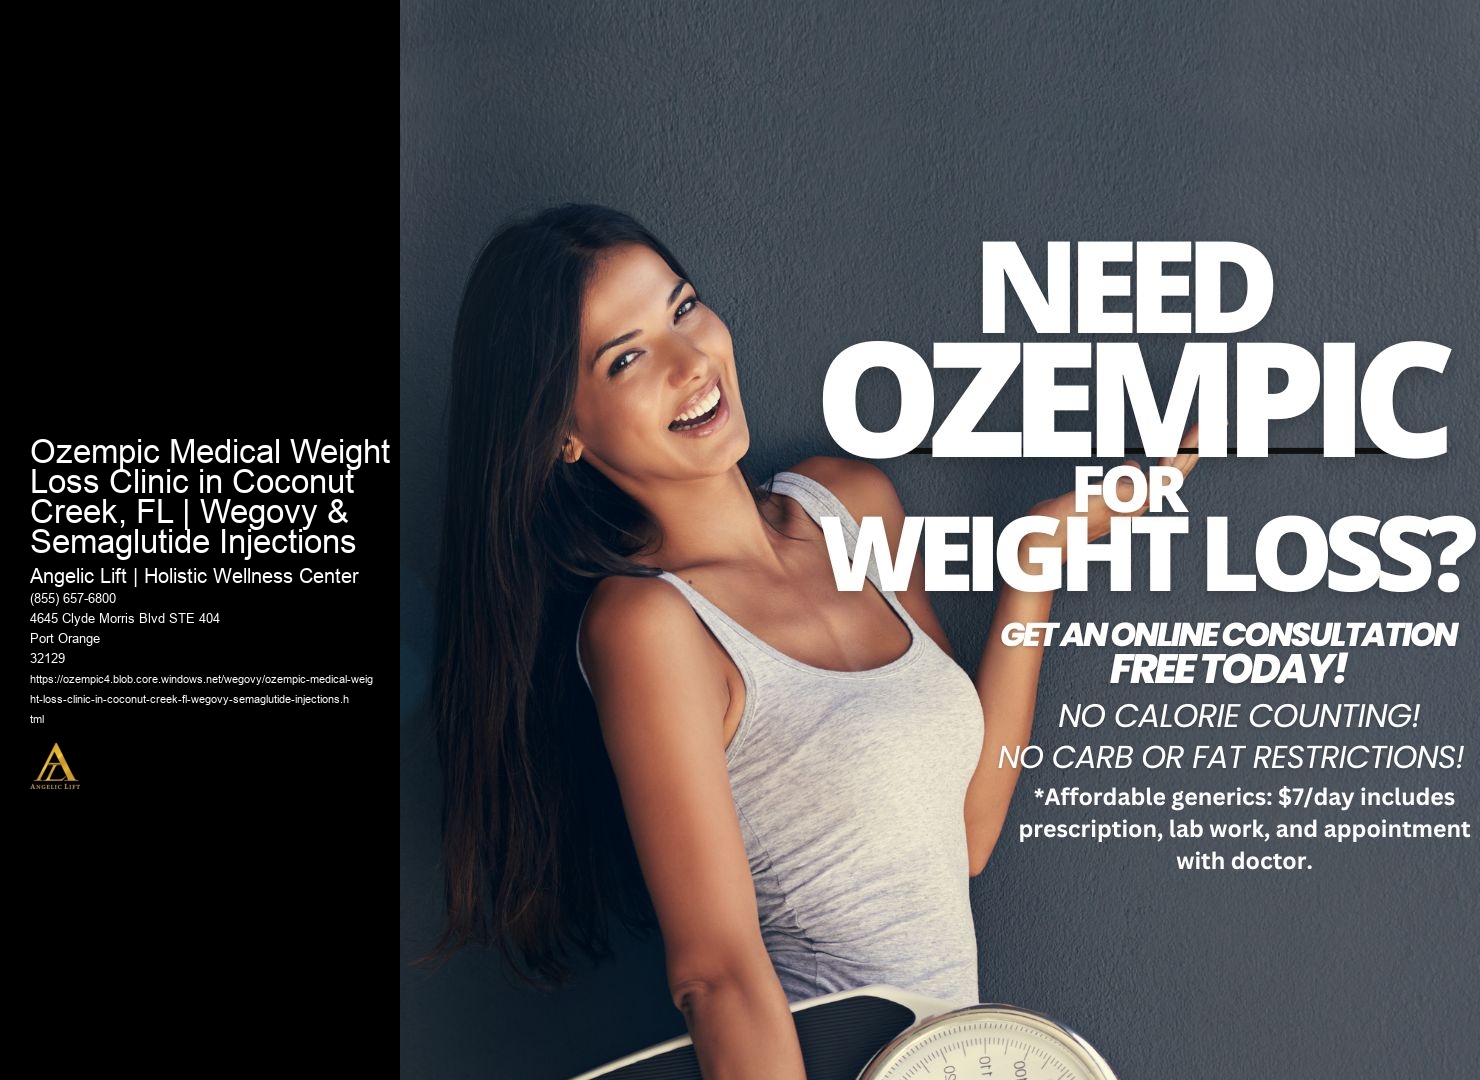 Ozempic Medical Weight Loss Clinic in Coconut Creek, FL | Wegovy & Semaglutide Injections